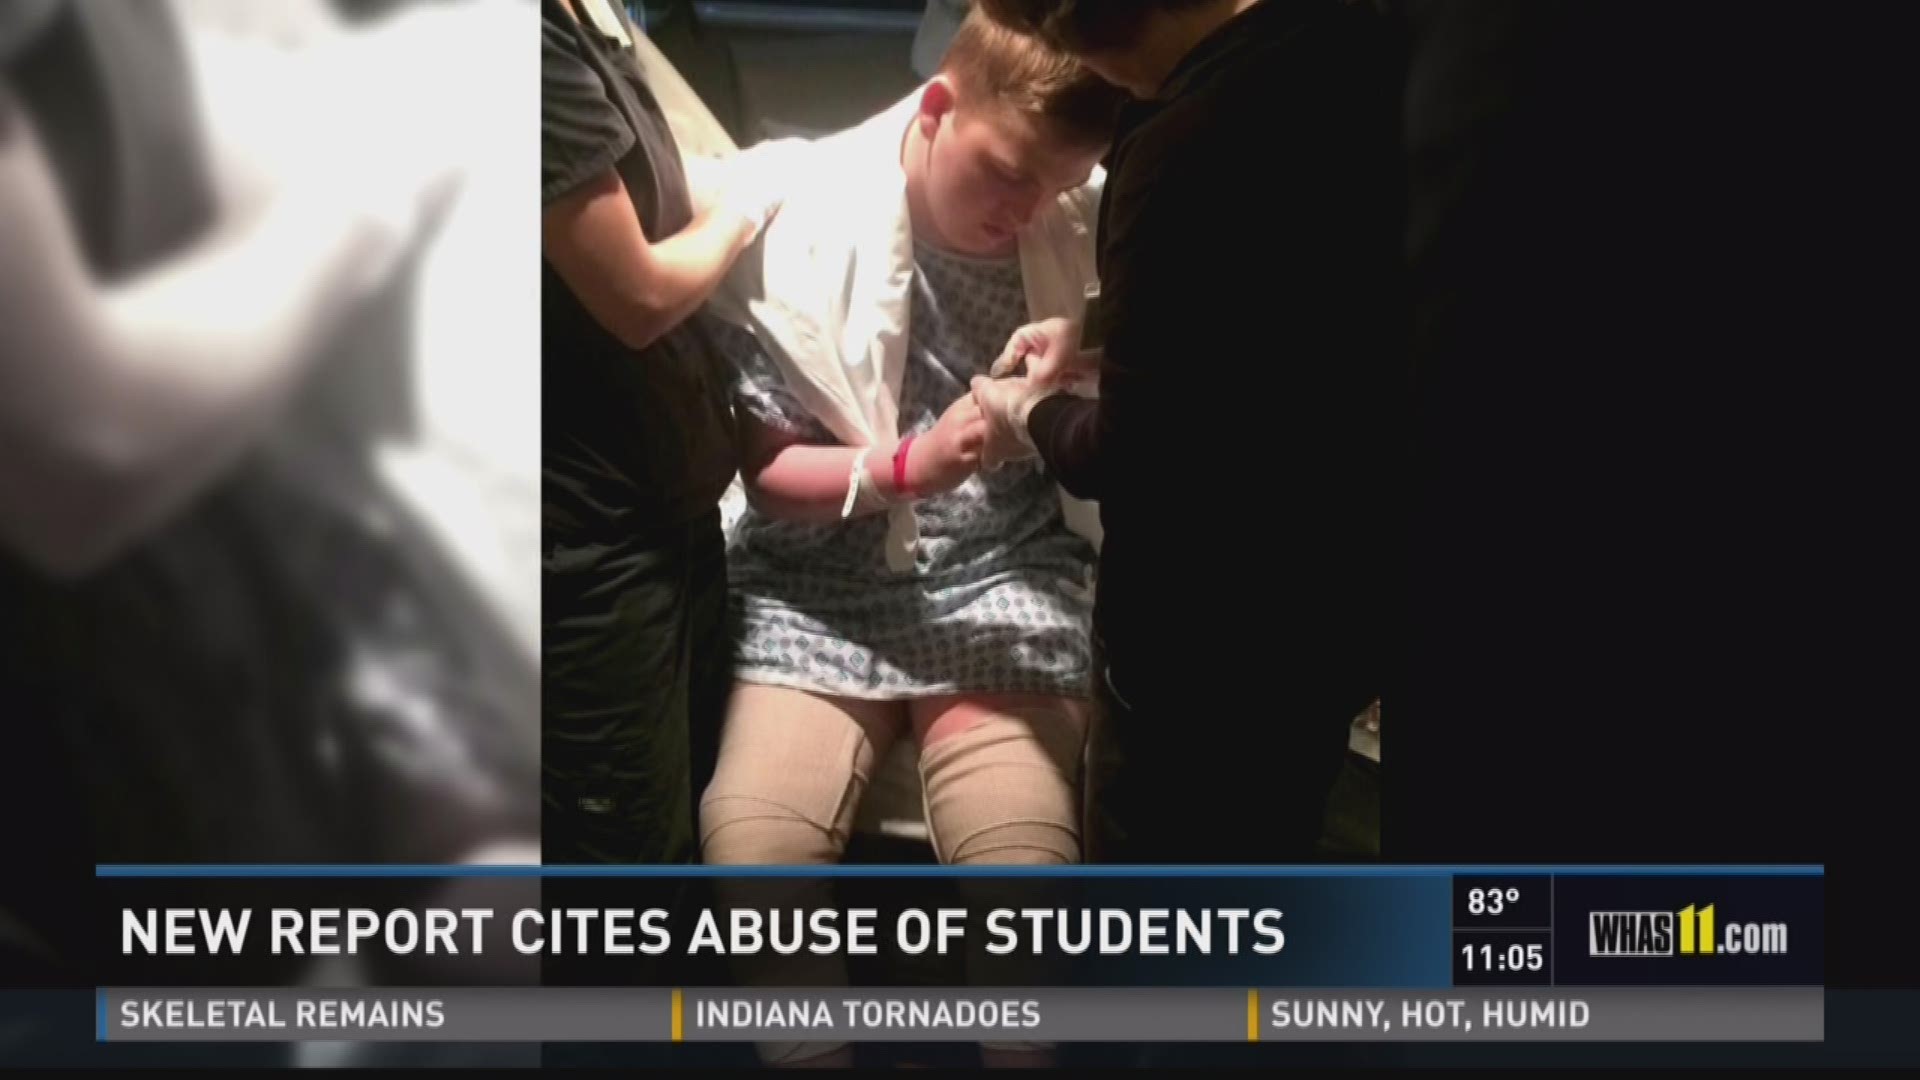 New report cites abuse of students